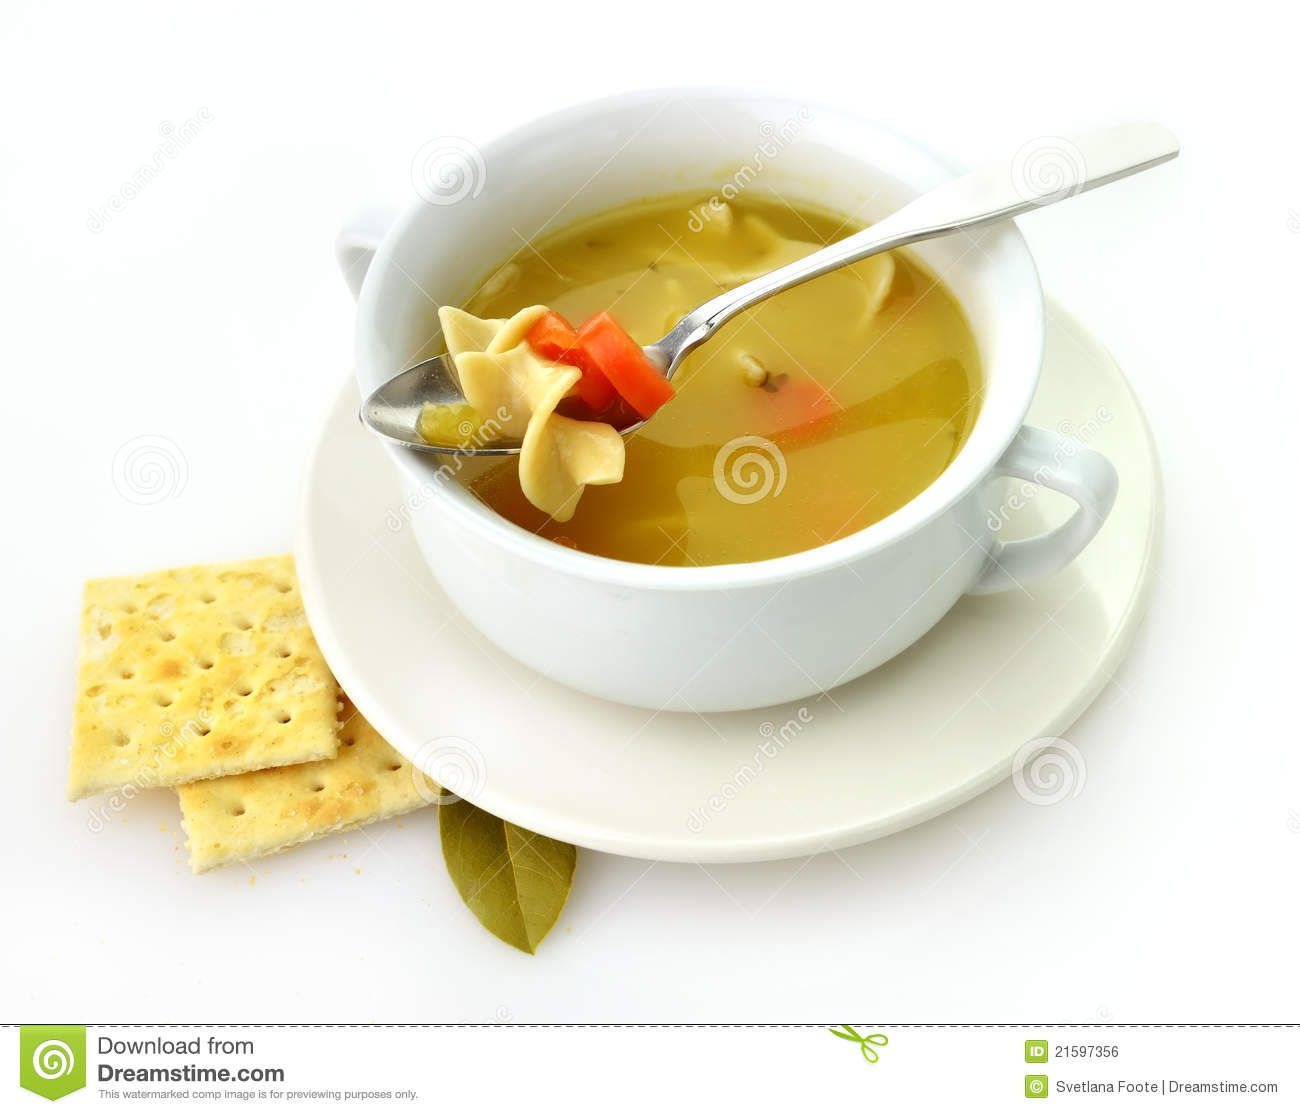 Chicken Noodle Soup Royalty Free Stock Image   Image  21597356